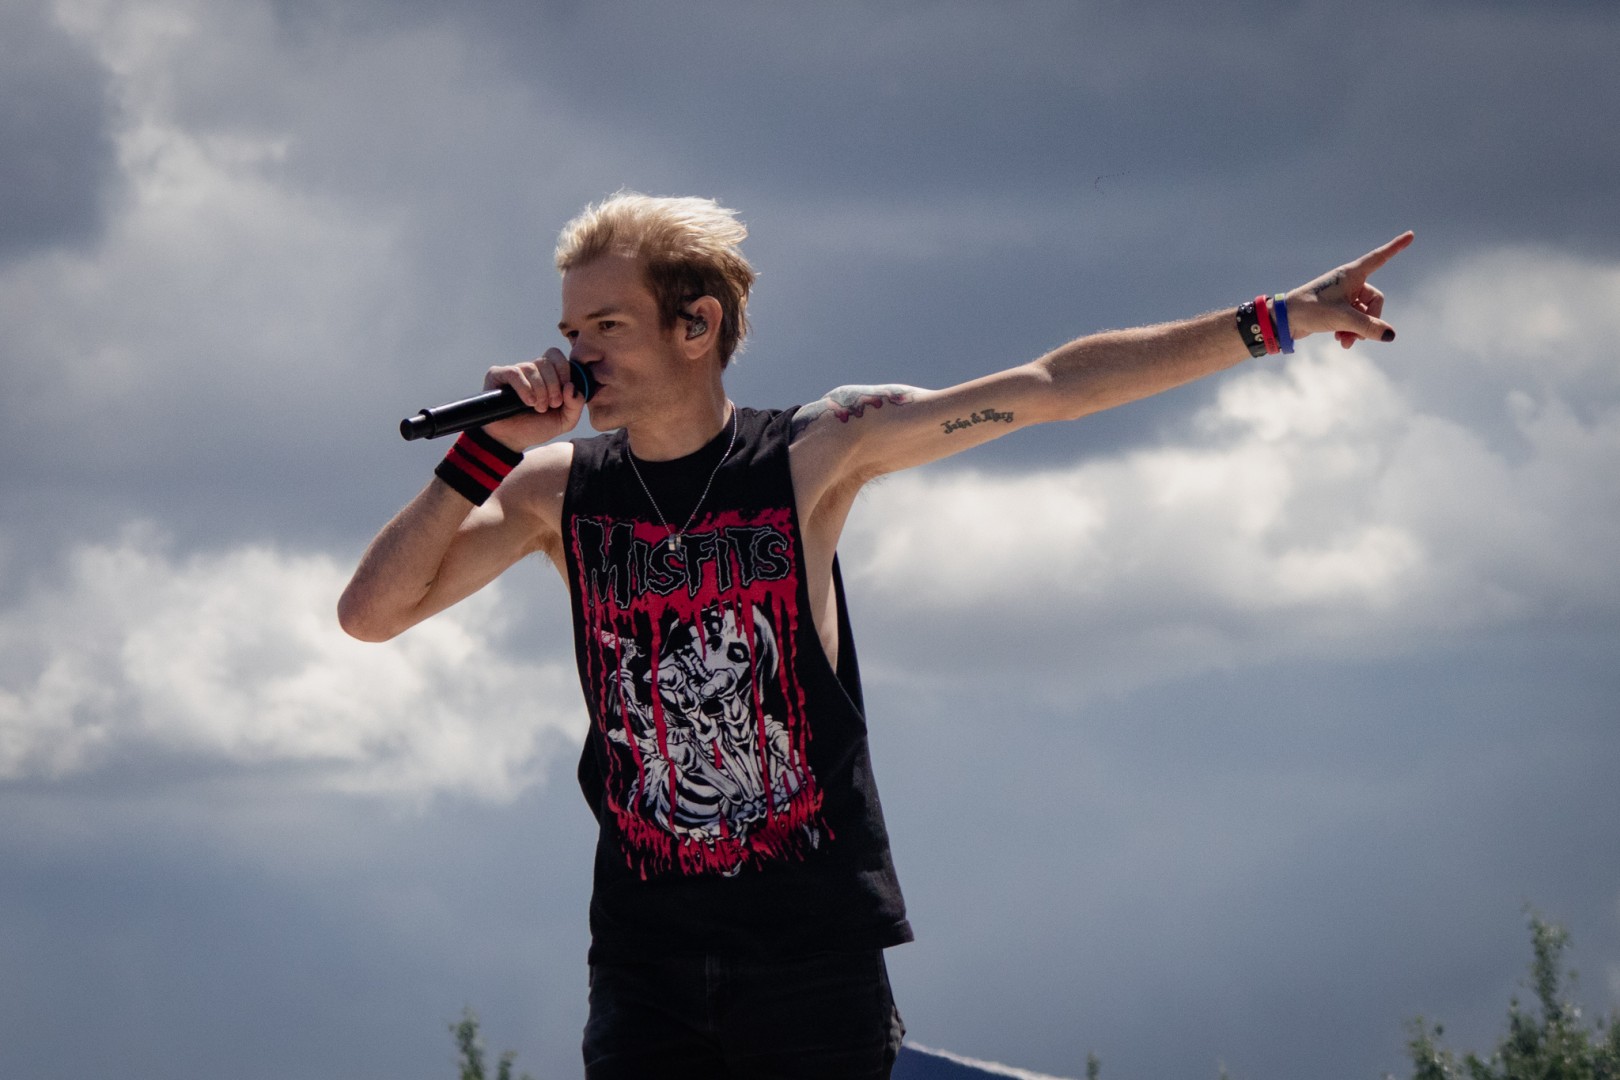 Sum 41 in Werchter on July 1, 2022 (c1bc6f4e2d)